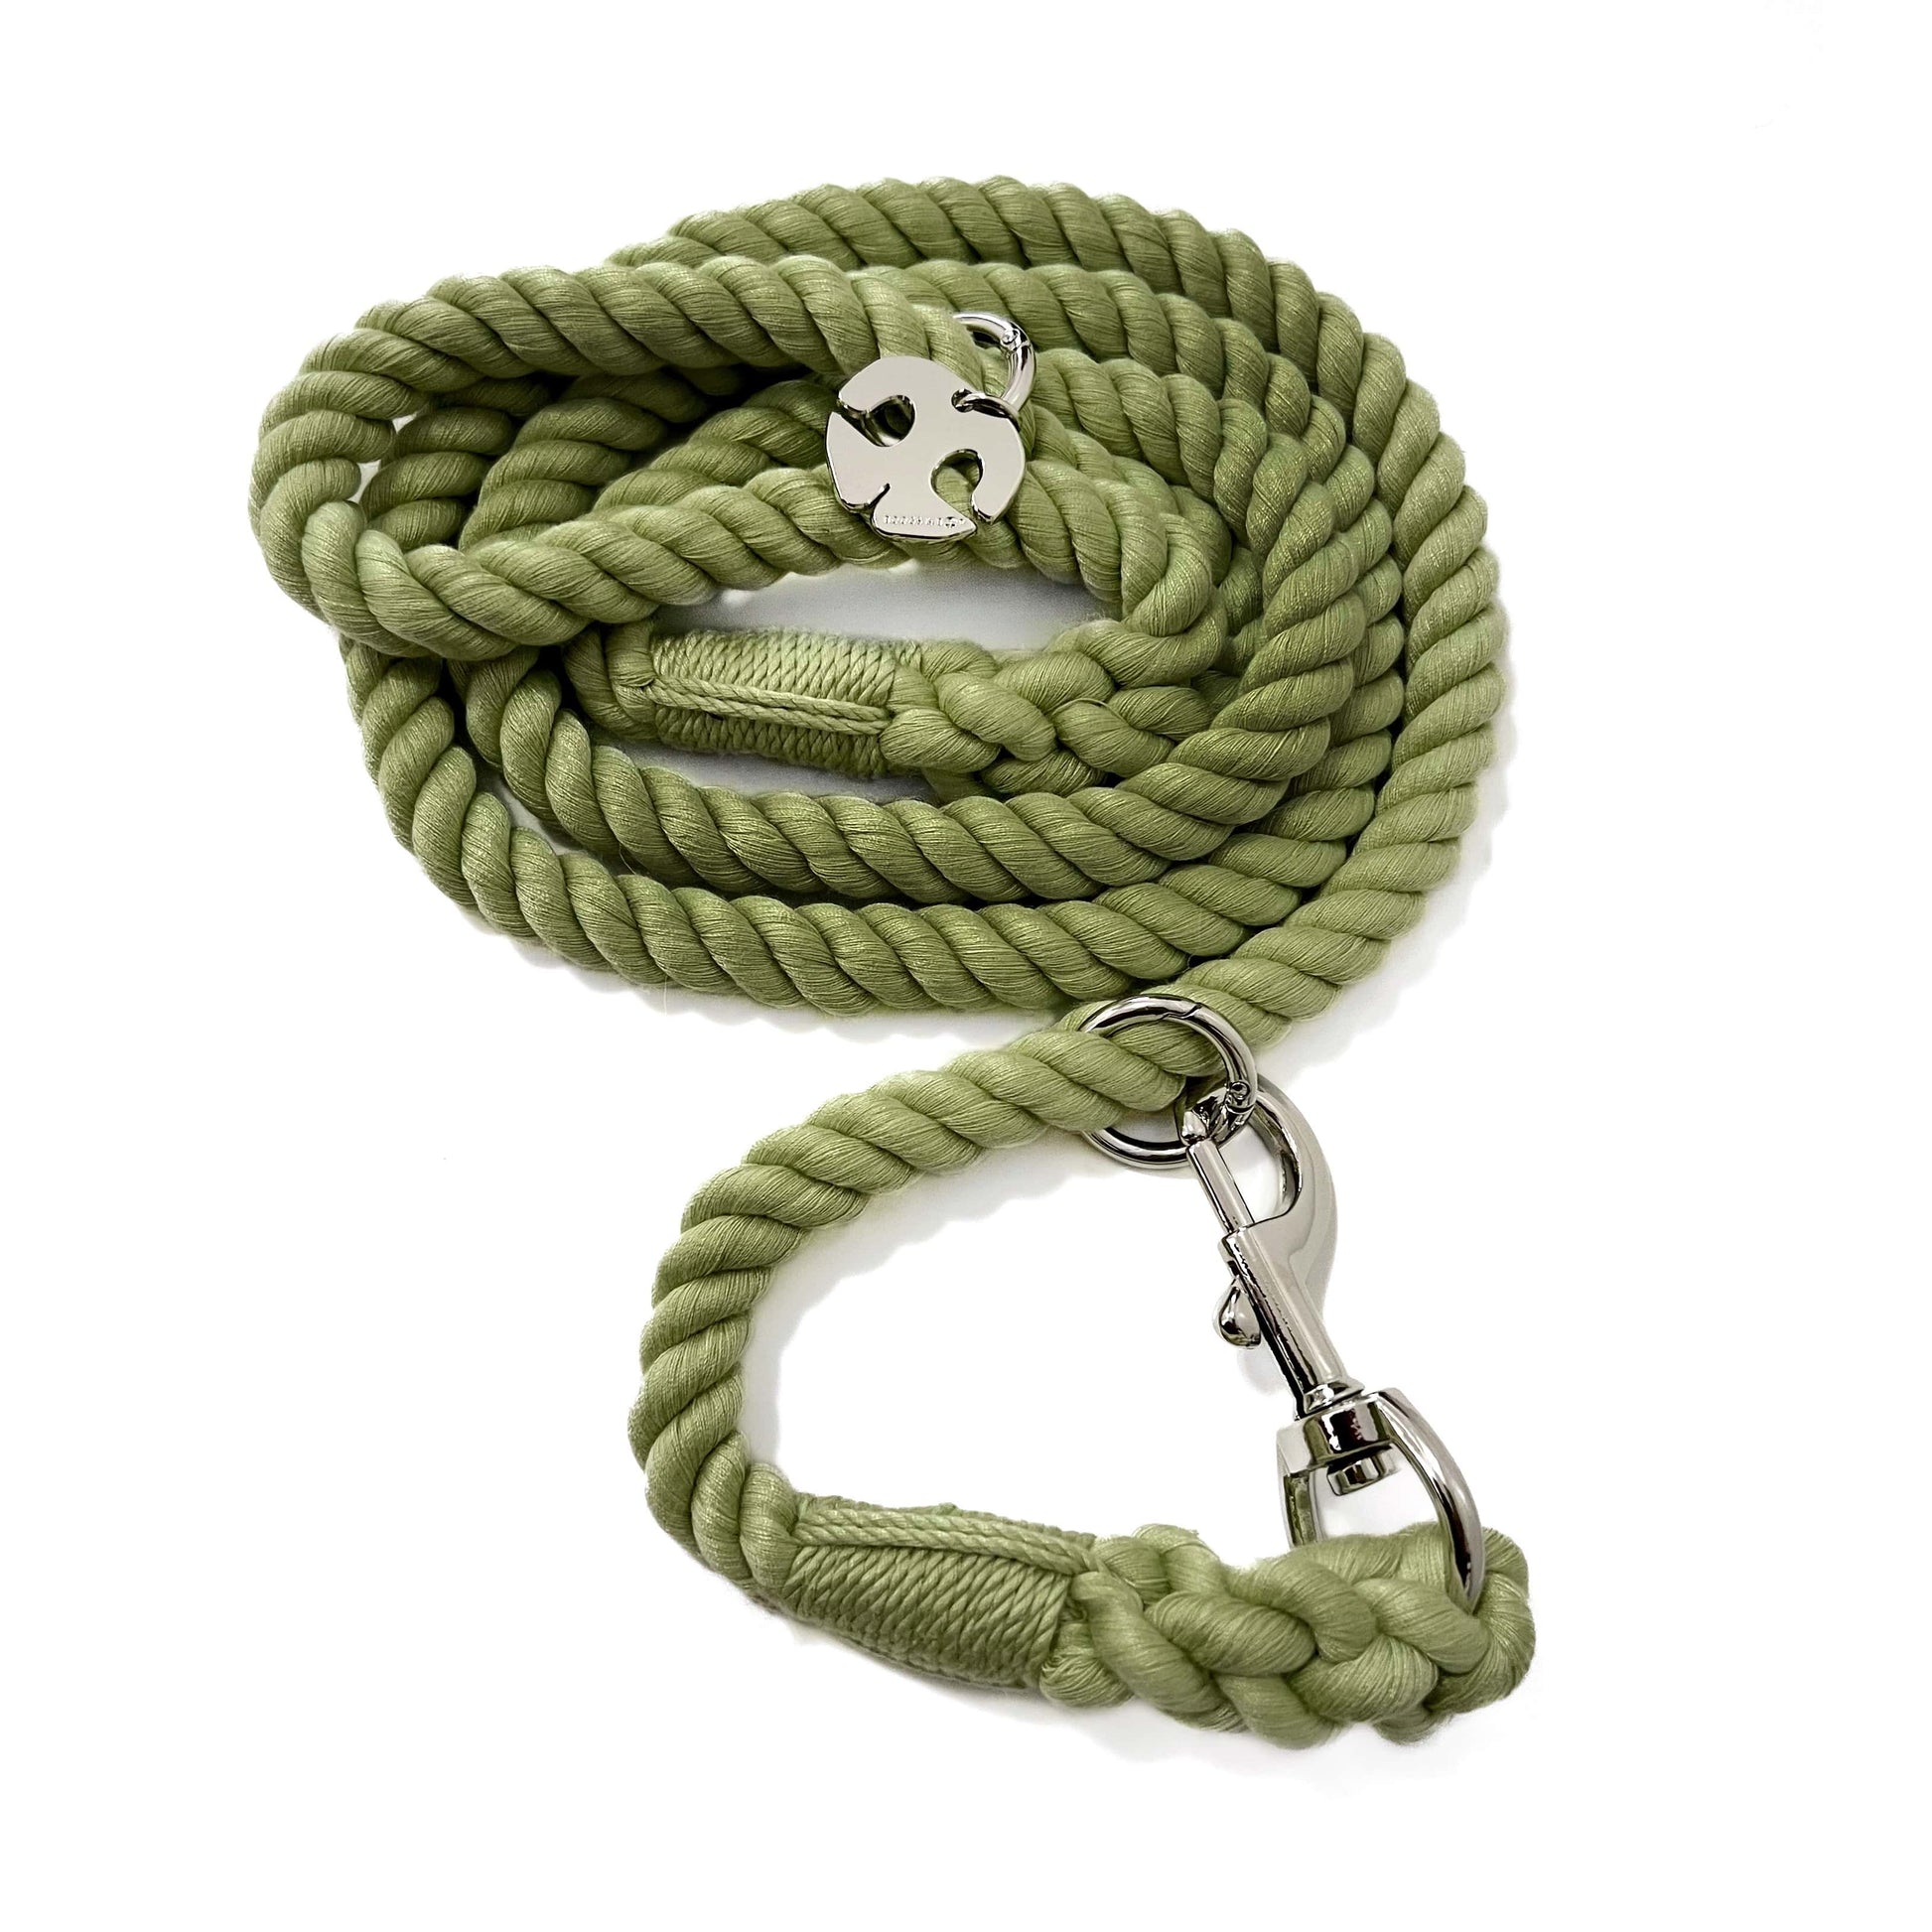 Shop Rope Leash with Collar - Sage Green by Boogs & Boop.